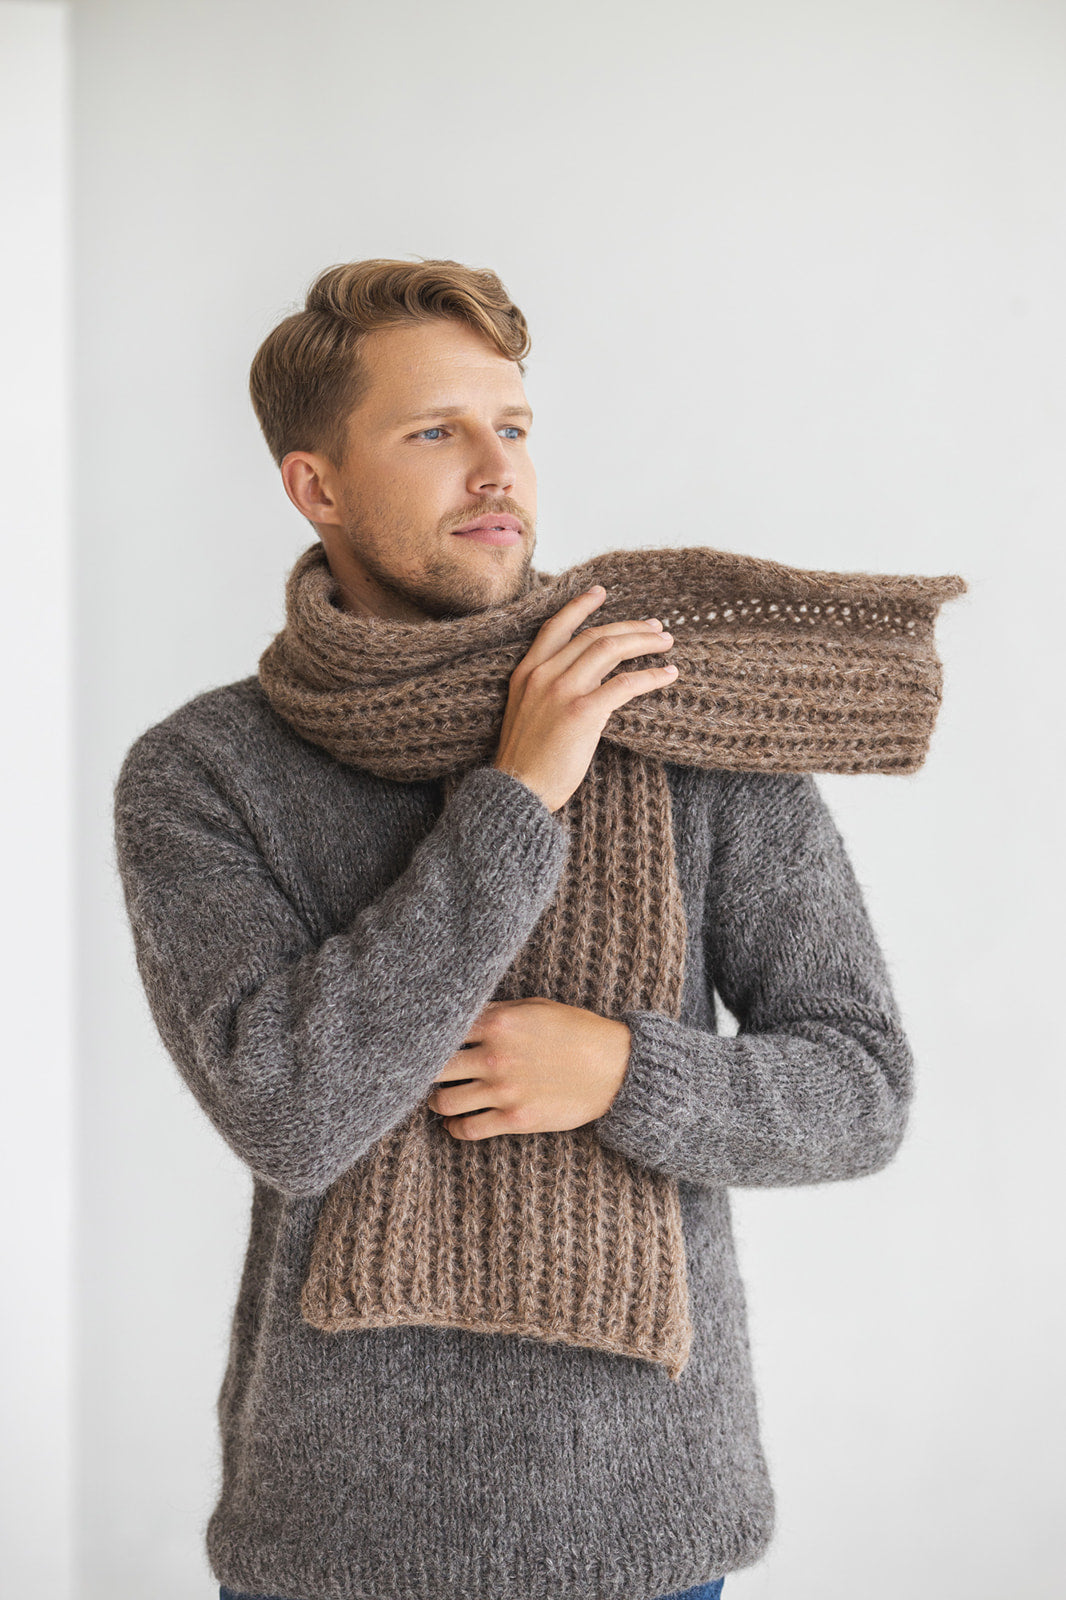 Brown cable knit alpaca wool mens scarf, beige oversized alpaca neck warmer for man, handmade camel ribbed chunky knitted winter scarves